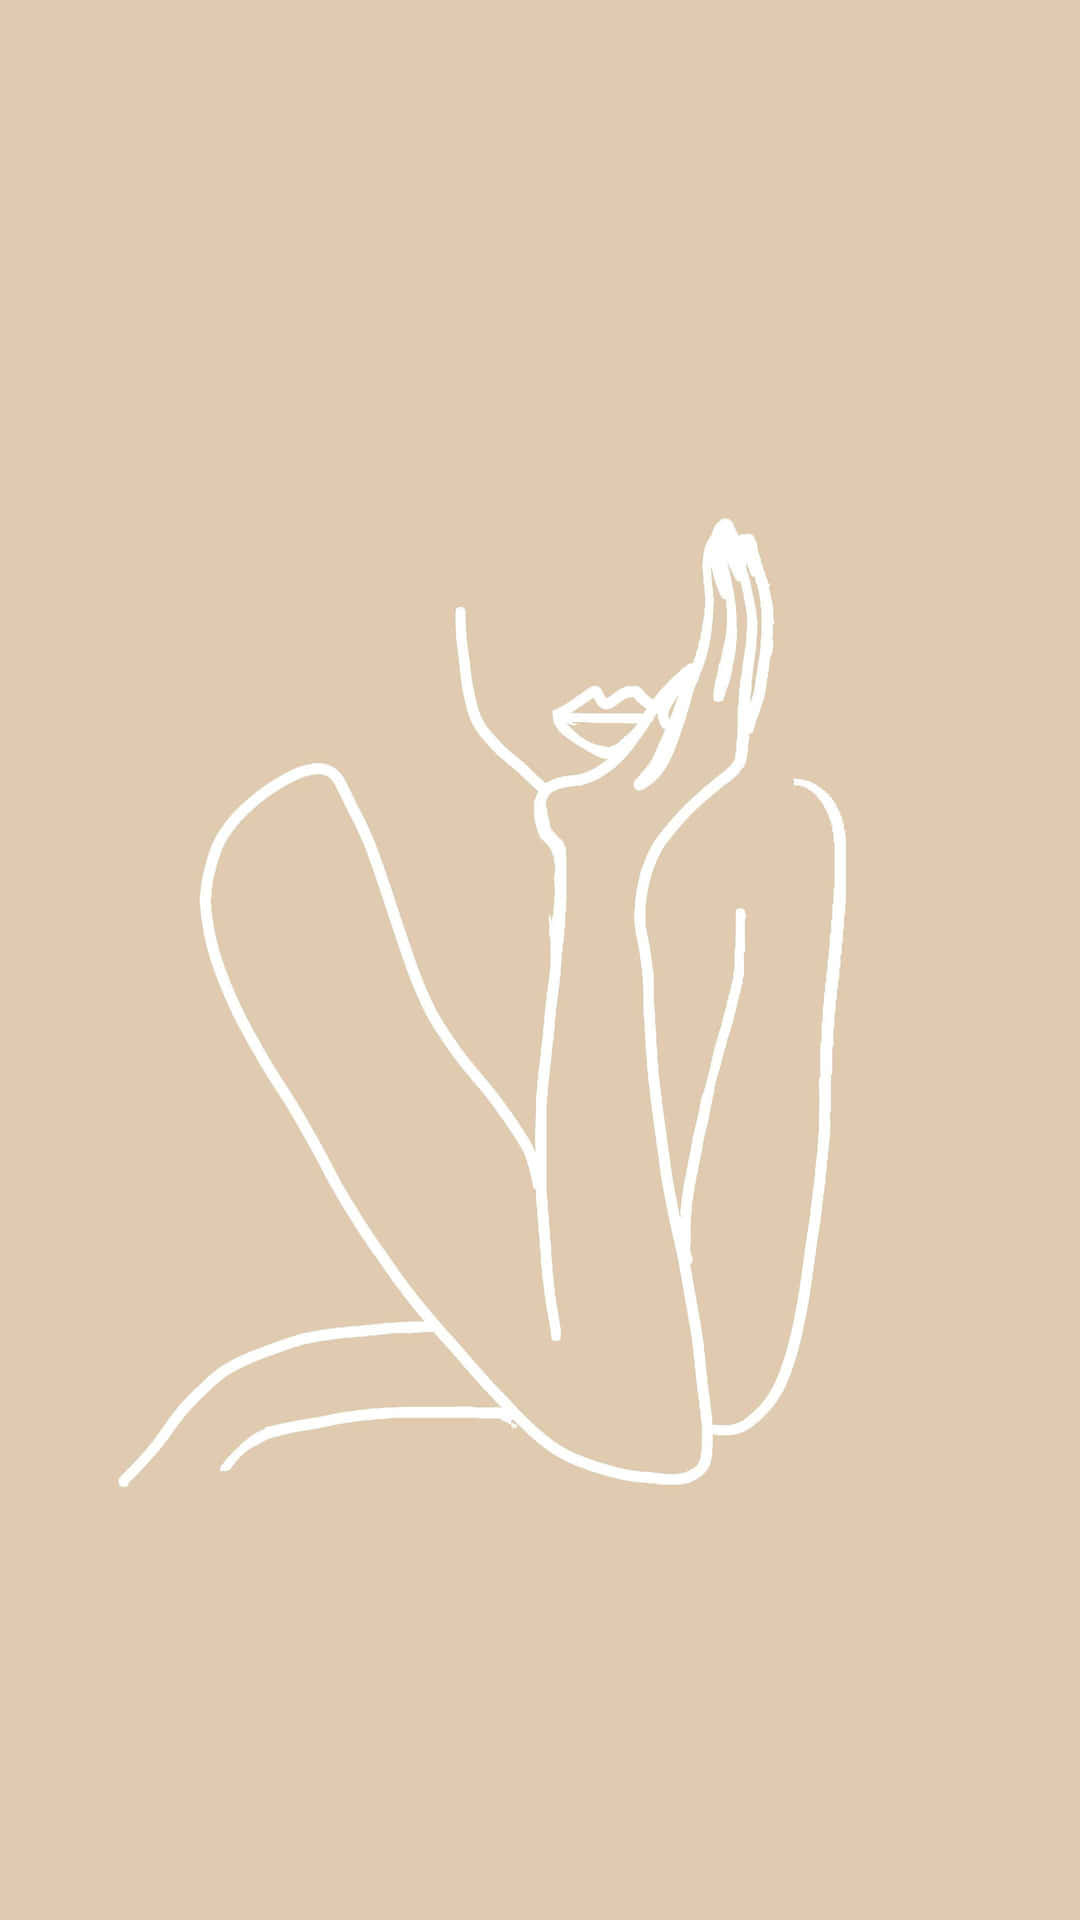 A Line Drawing Of A Woman With Her Hands On Her Face